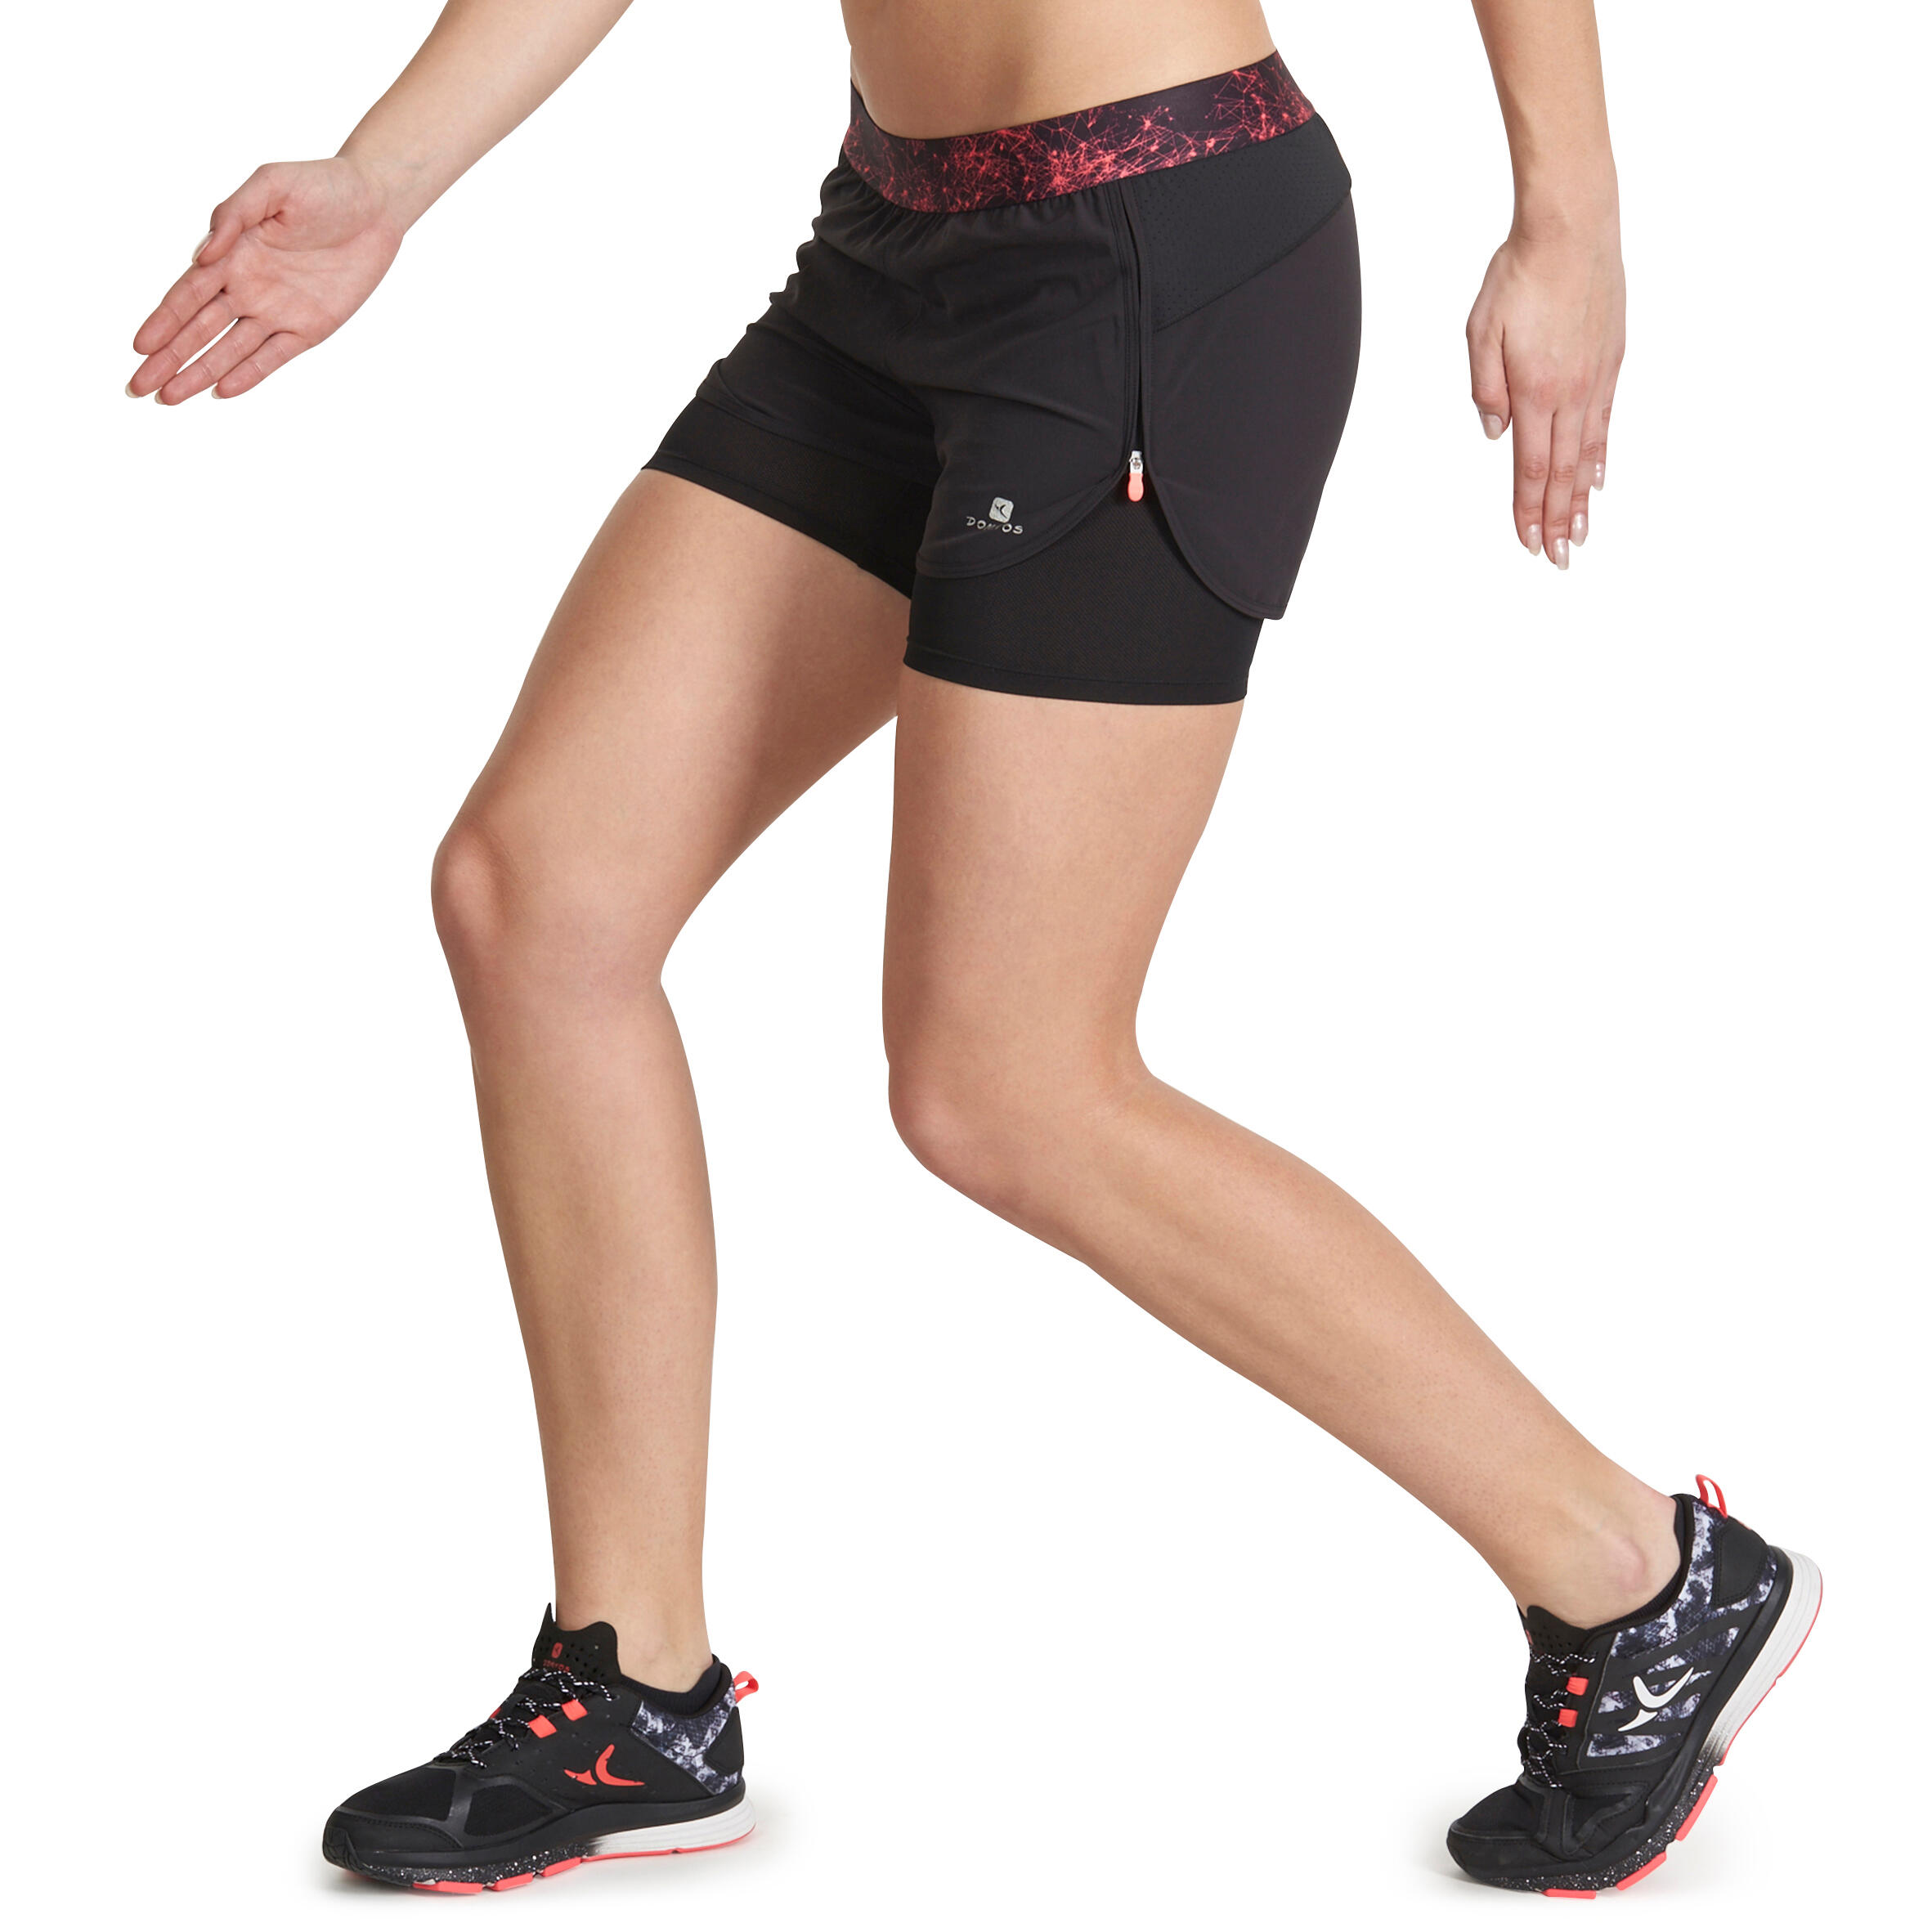 Energy Xtreme Women's 2-in-1 Fitness Shorts - Black/Printed Waistband 5/13